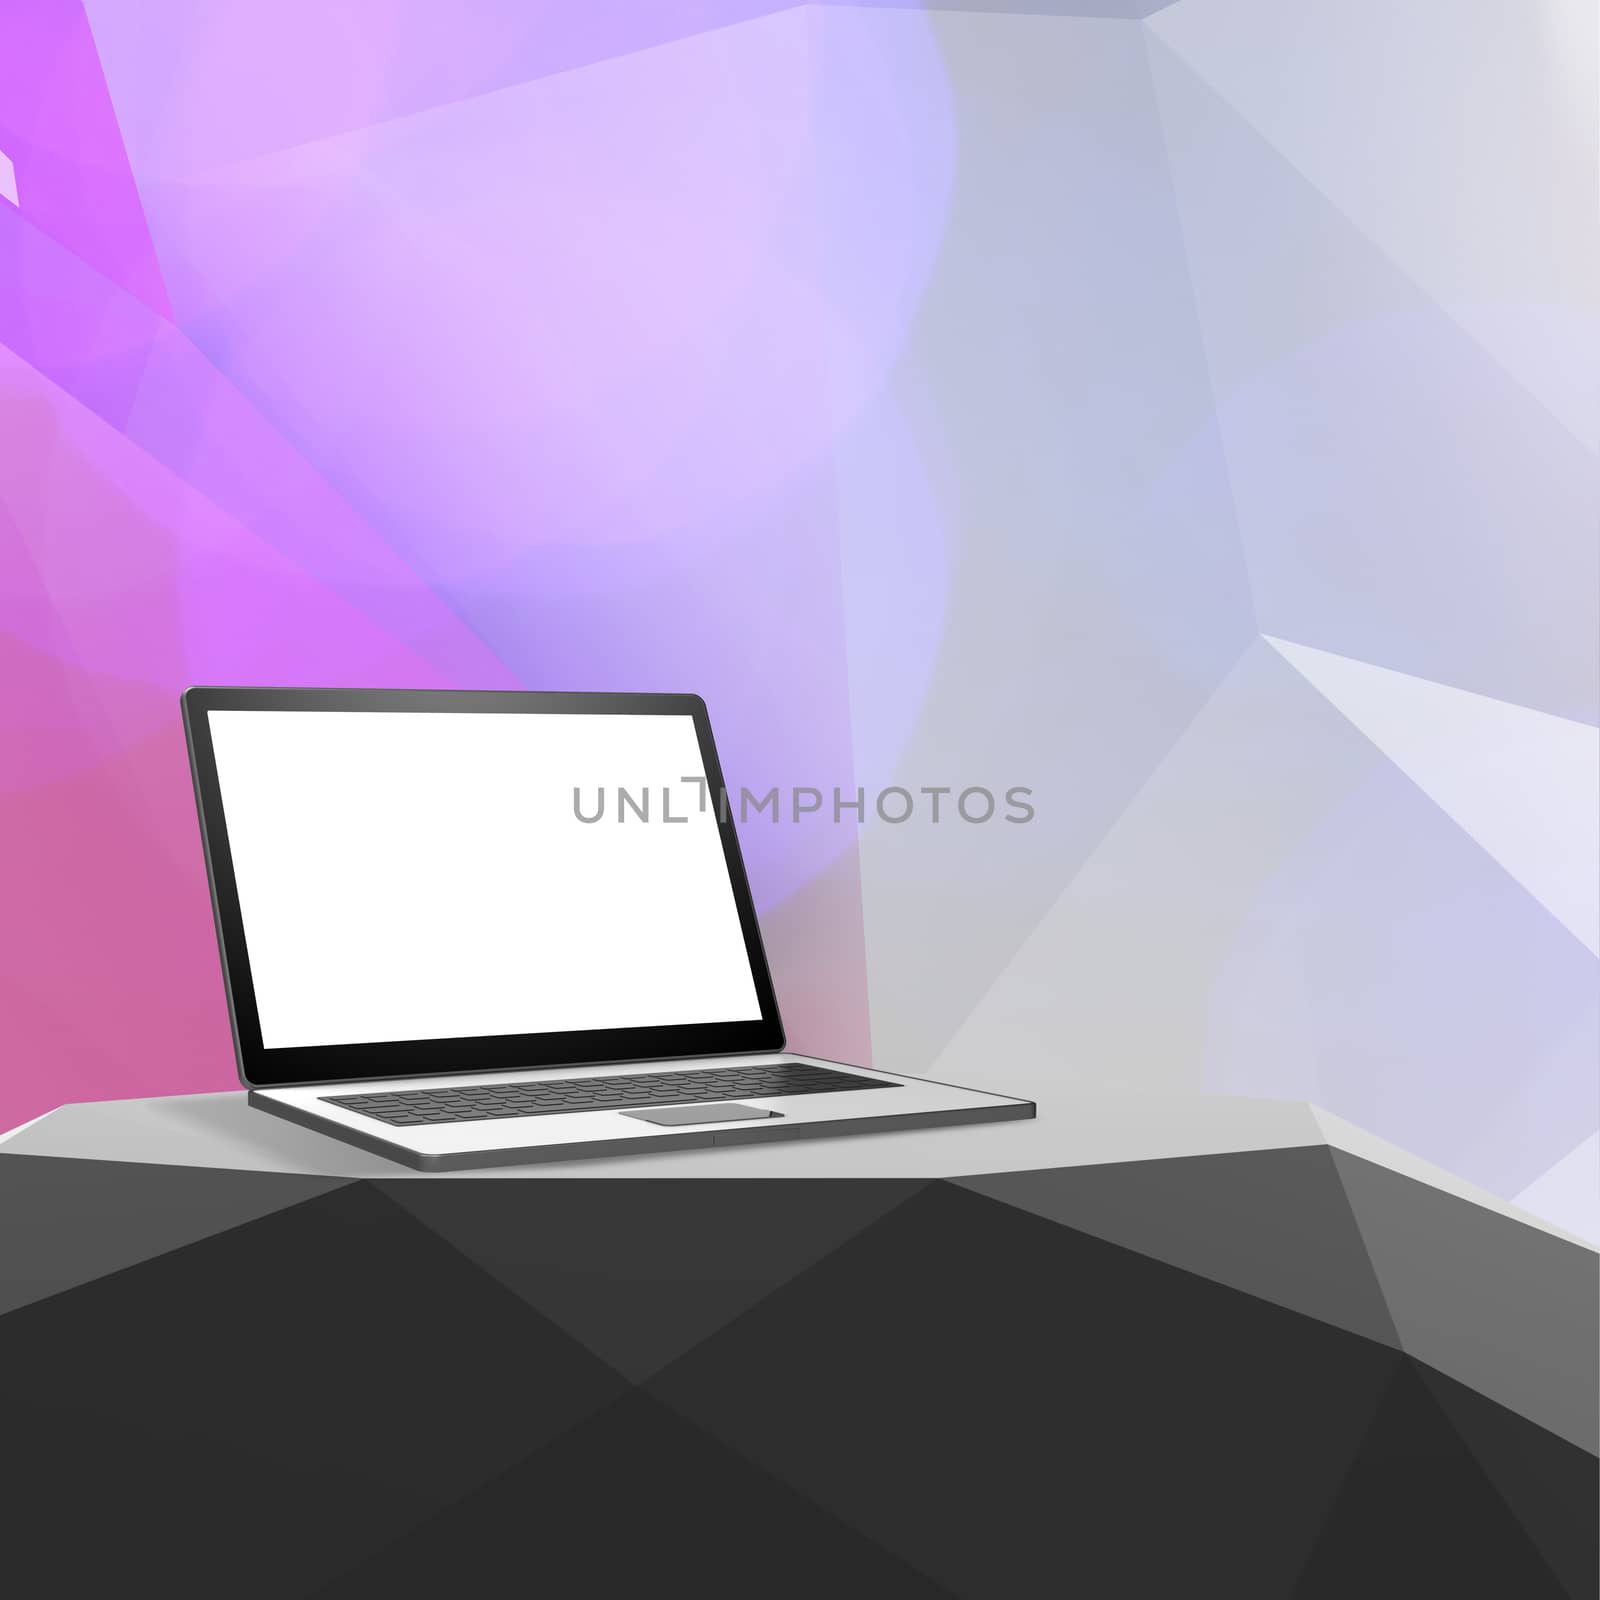 Laptop with blank screen on laminate table and low poly geometri by everythingpossible